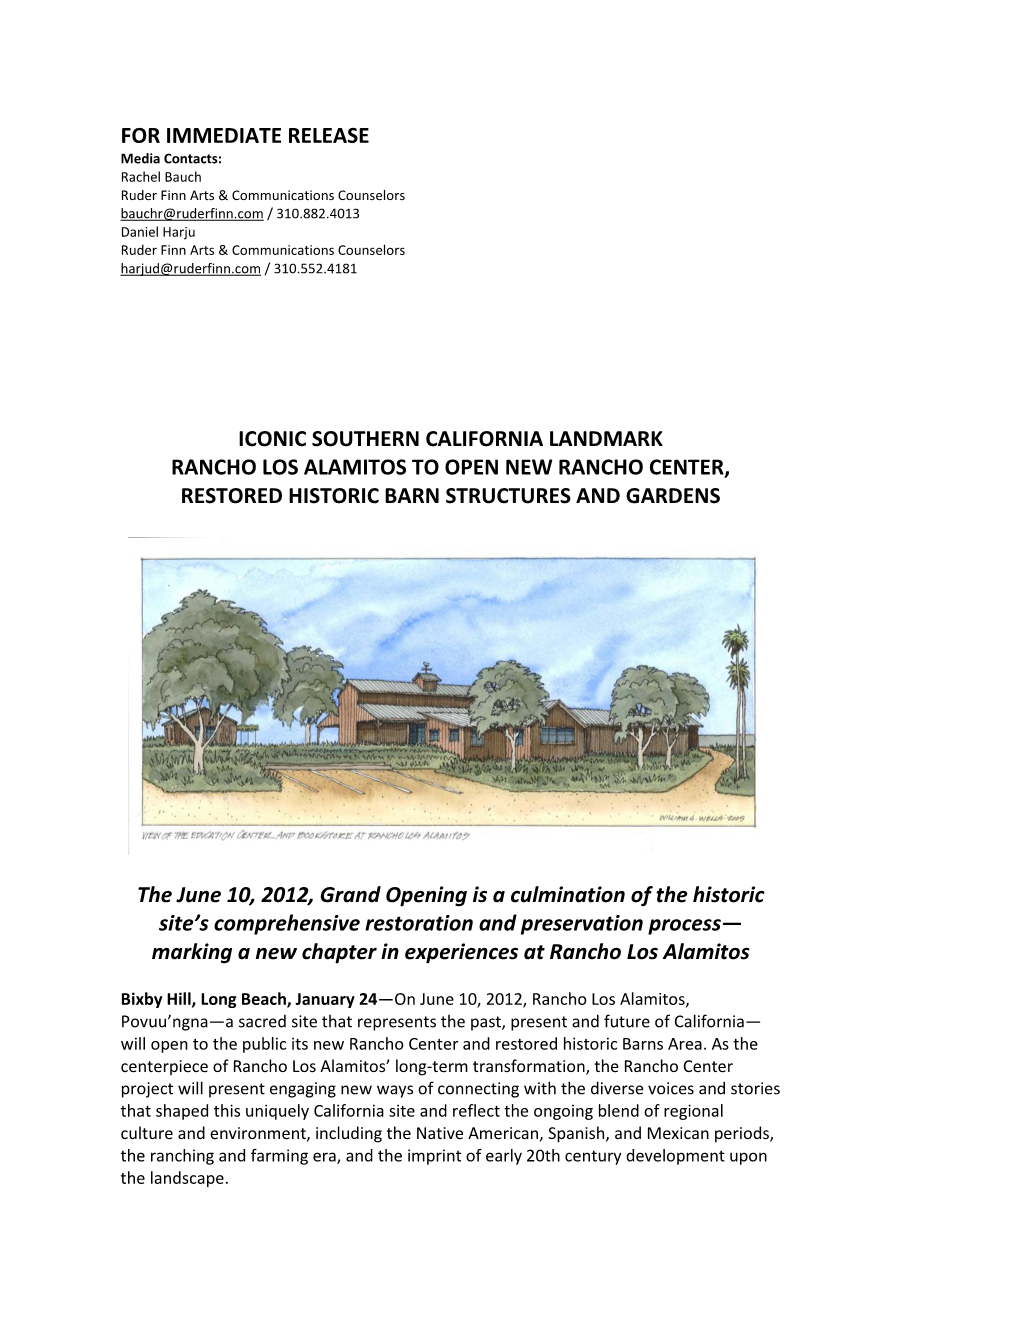 For Immediate Release Iconic Southern California Landmark Rancho Los Alamitos to Open New Rancho Center, Restored Historic